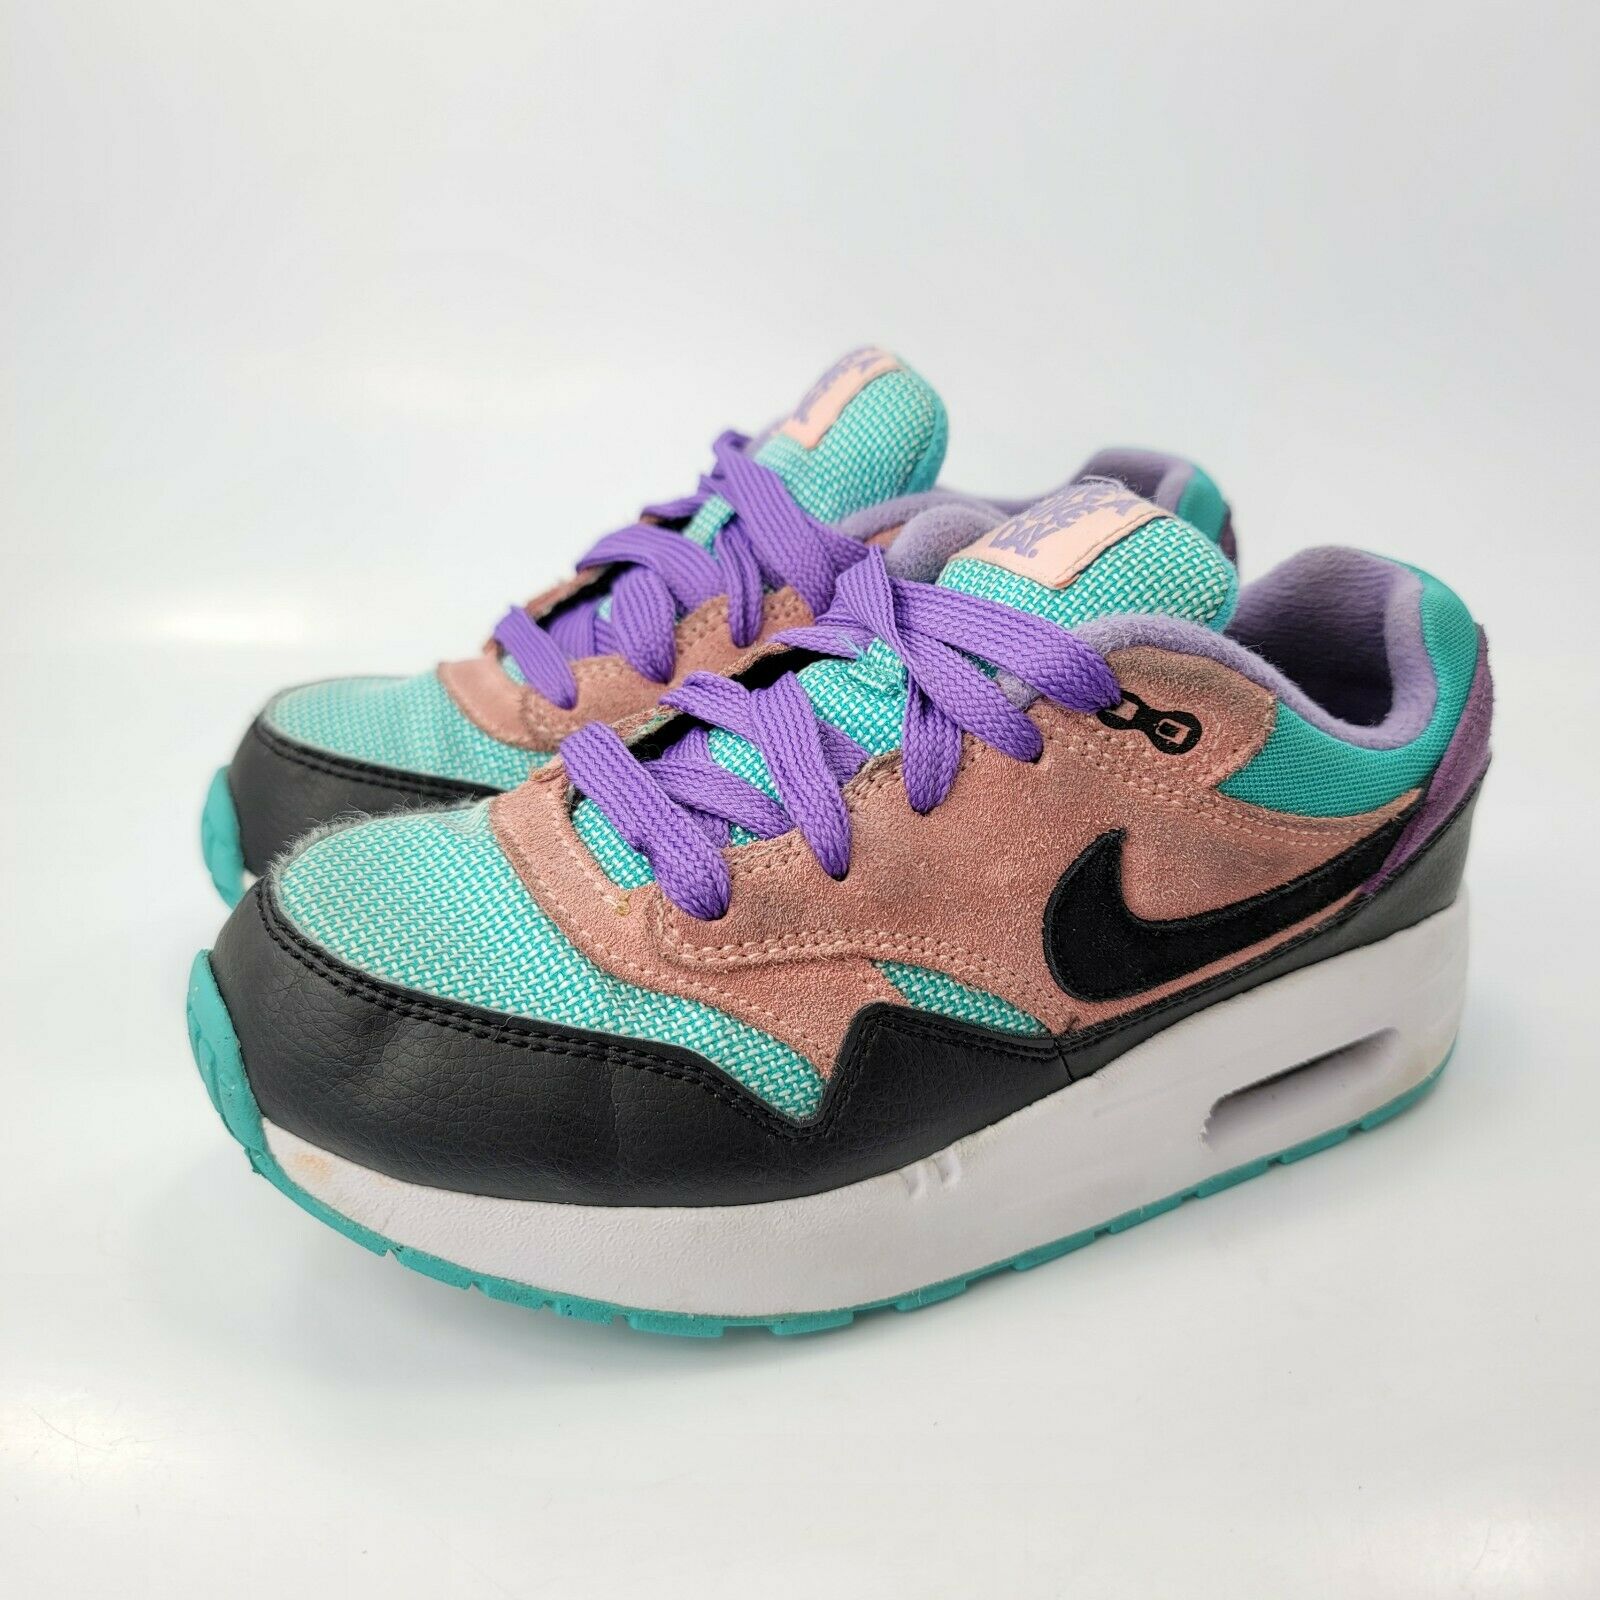 Nike Air Max 1 Have A Nike Day PS Shoe Girls Size 2Y BQ7213-001 Pink Blue Black